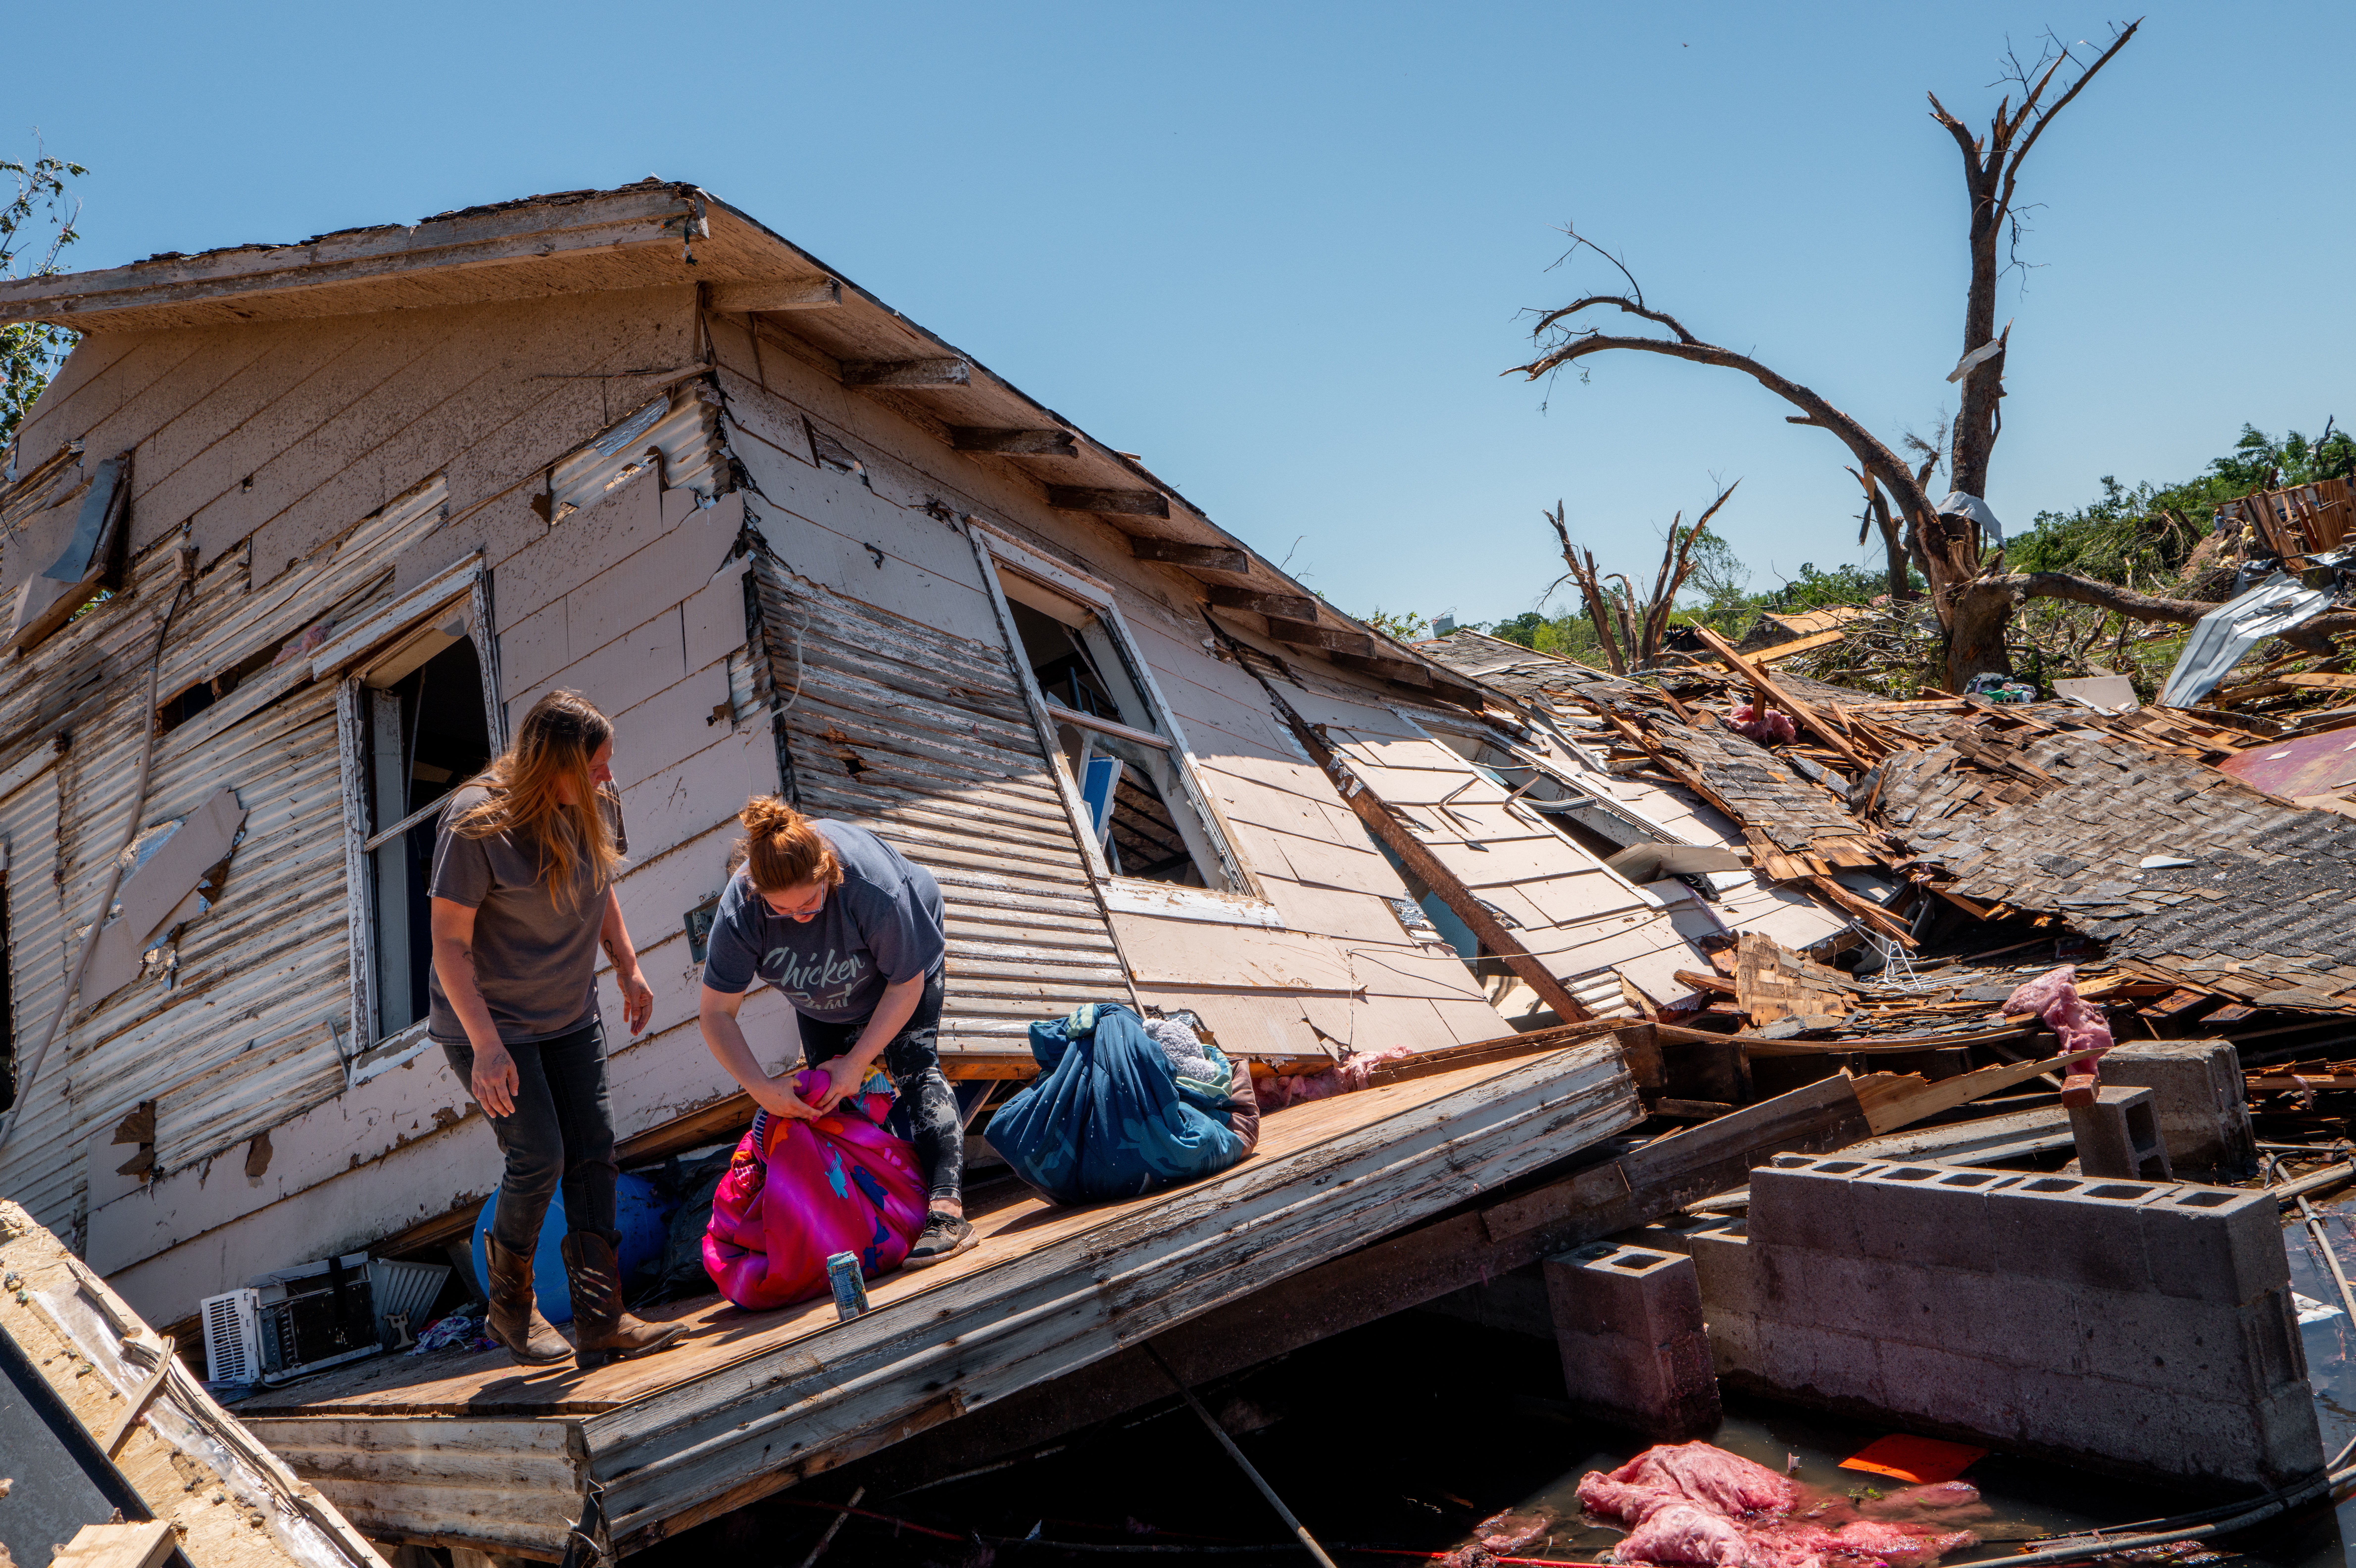 A family sift through and recover lost items after their home was struck by a tornado